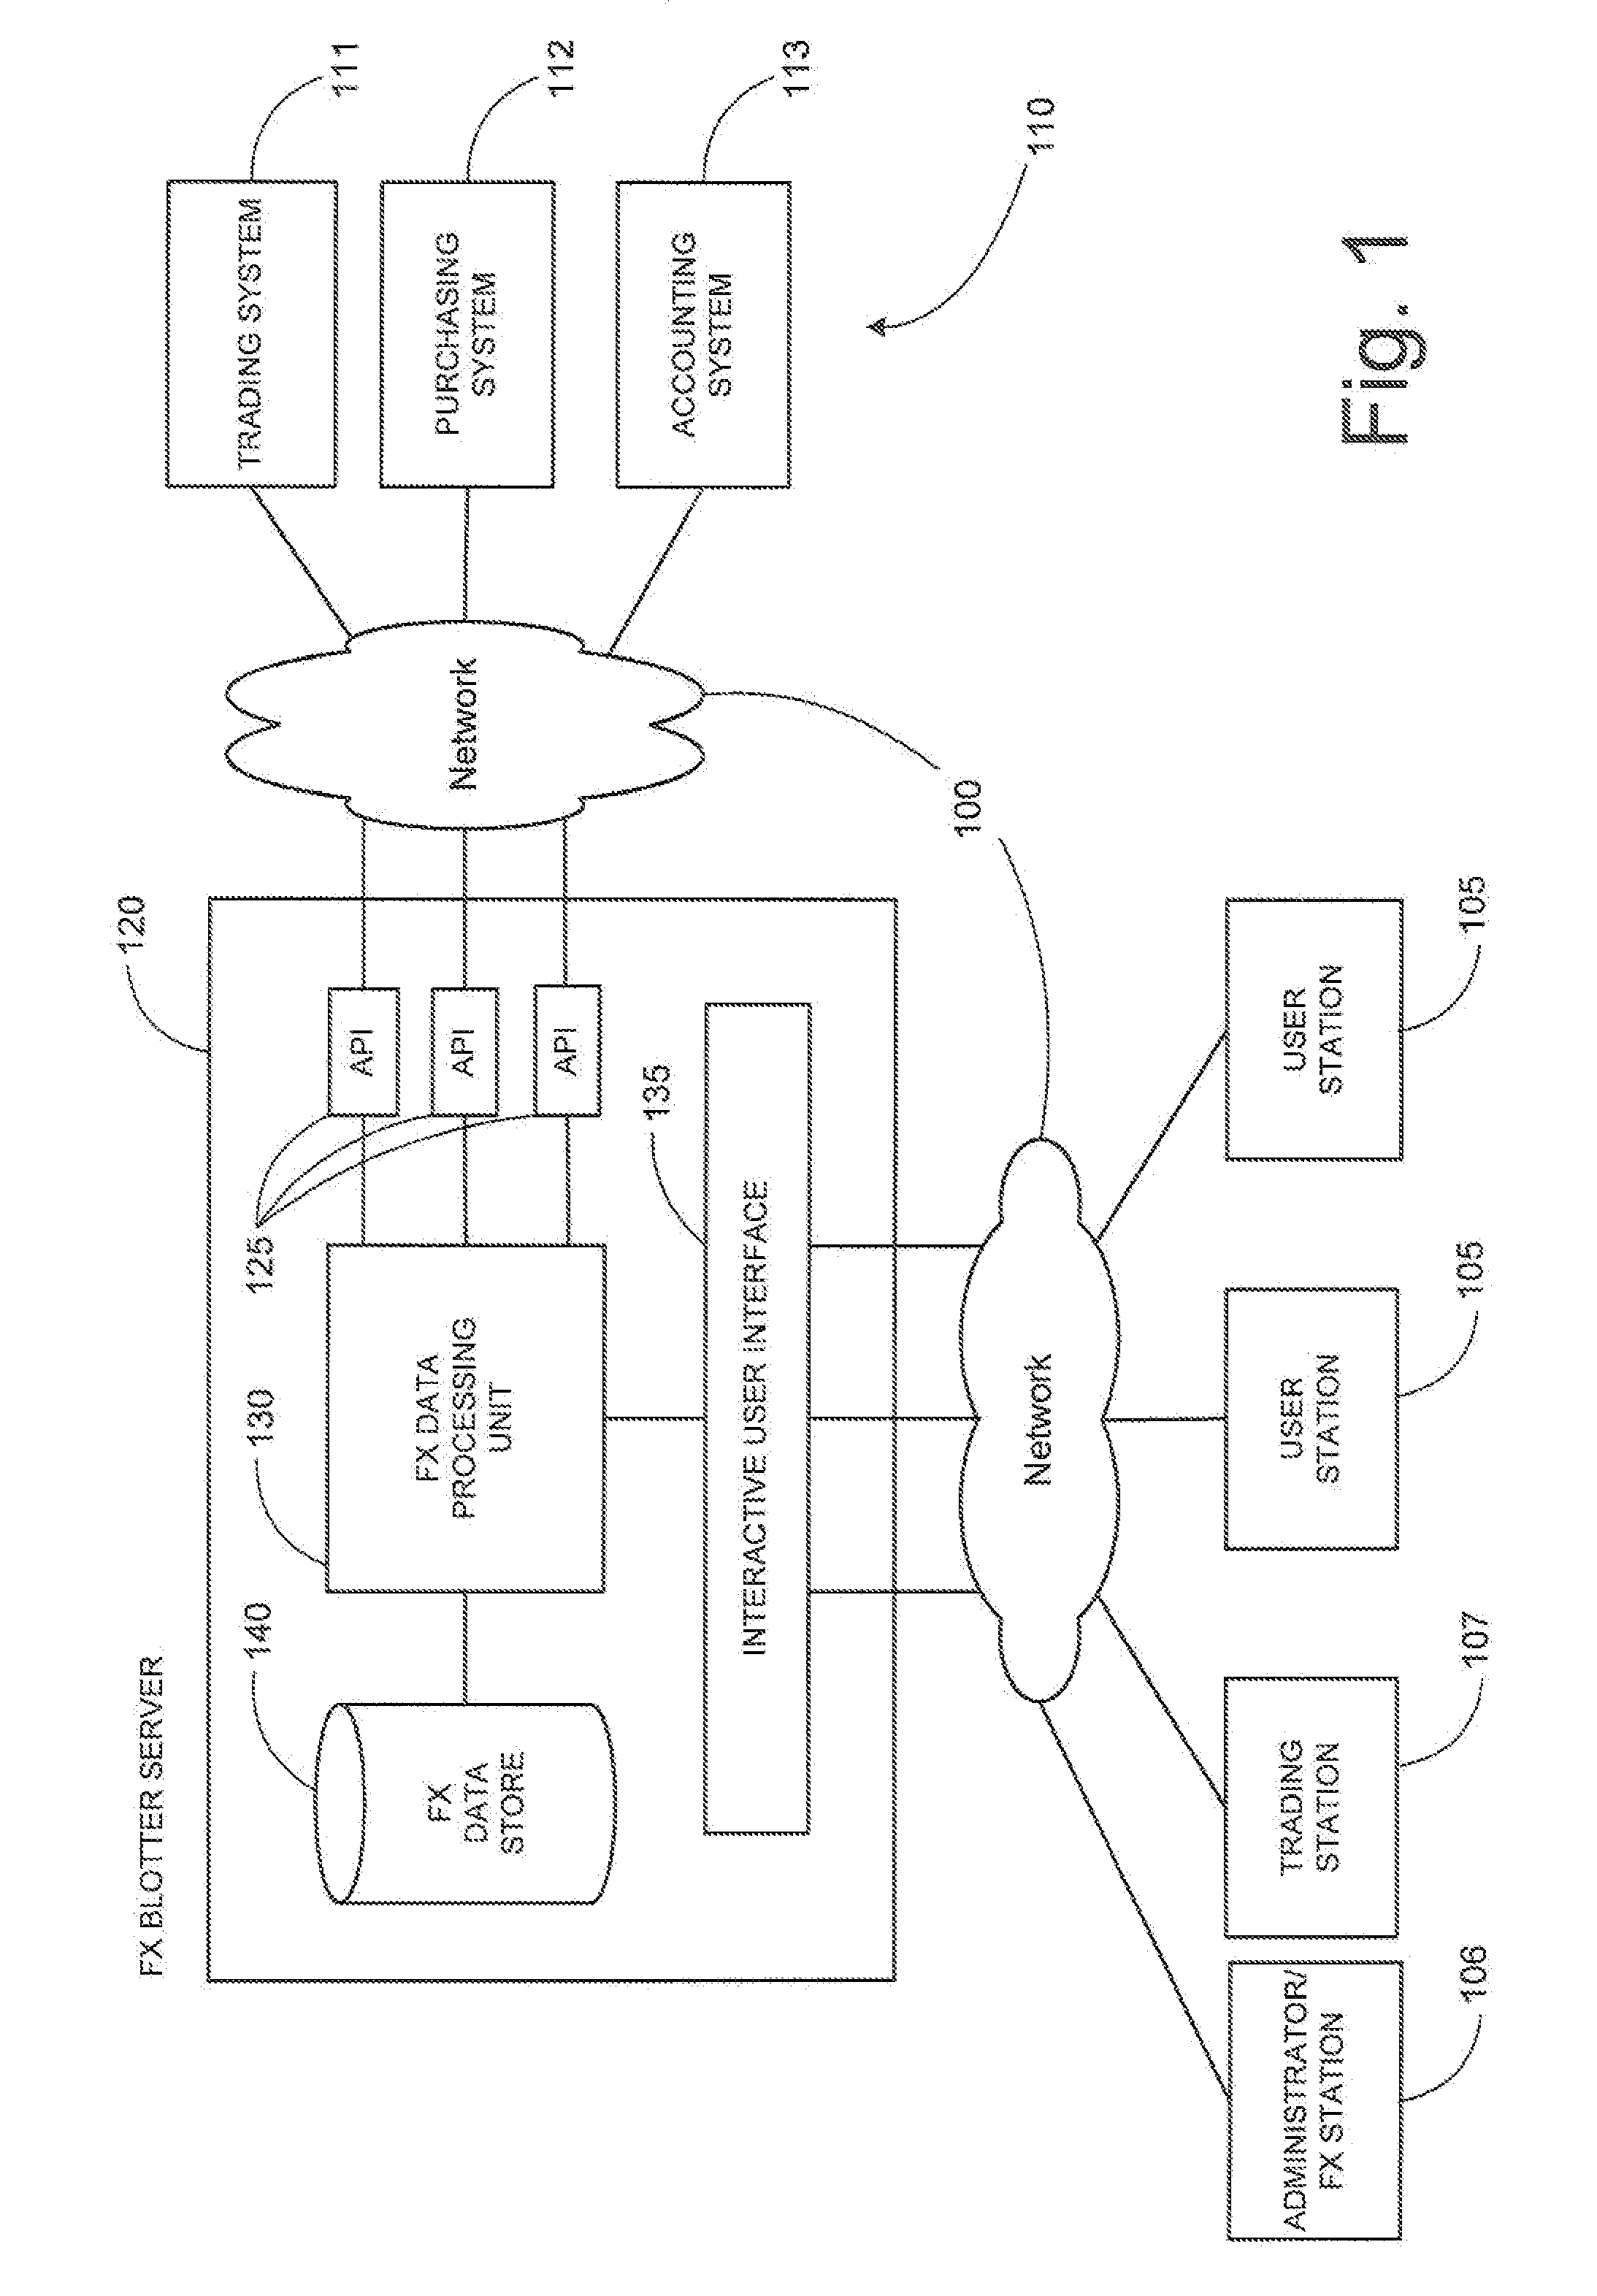 System and method for facilitating foreign currency management